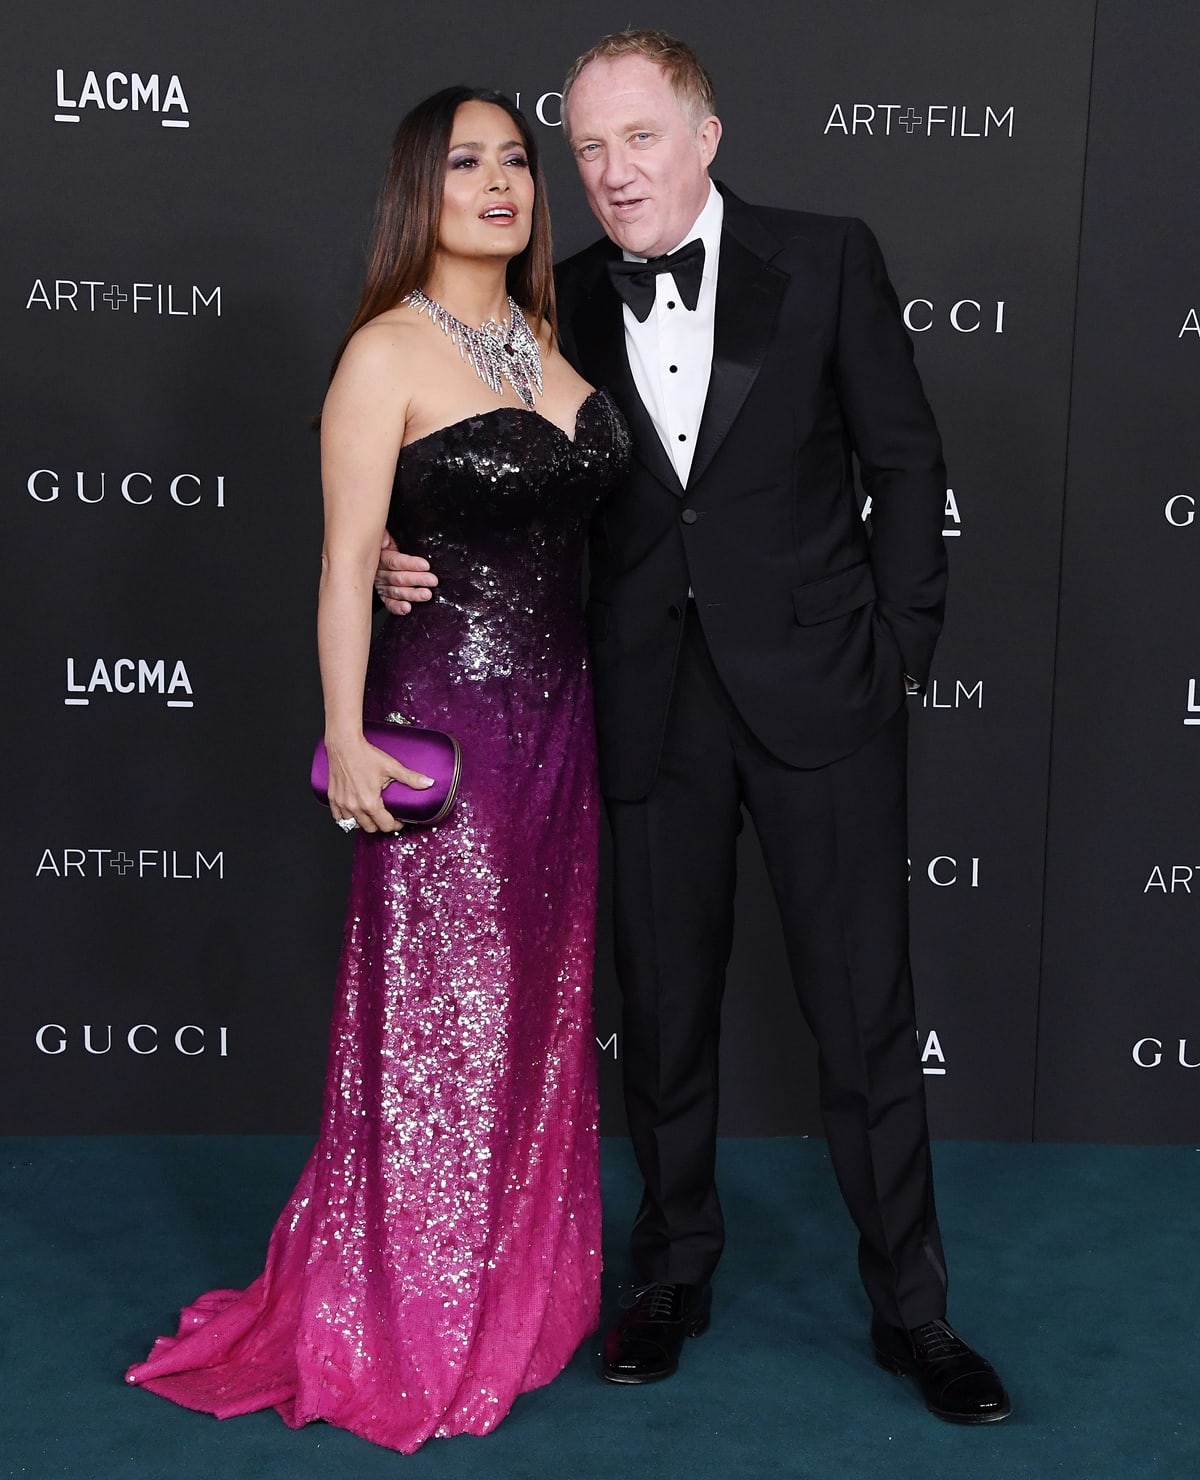 Salma Hayek Pinault in a Saint Laurent dress with her husband François-Henri Pinault at the 10th Annual LACMA ART+FILM GALA